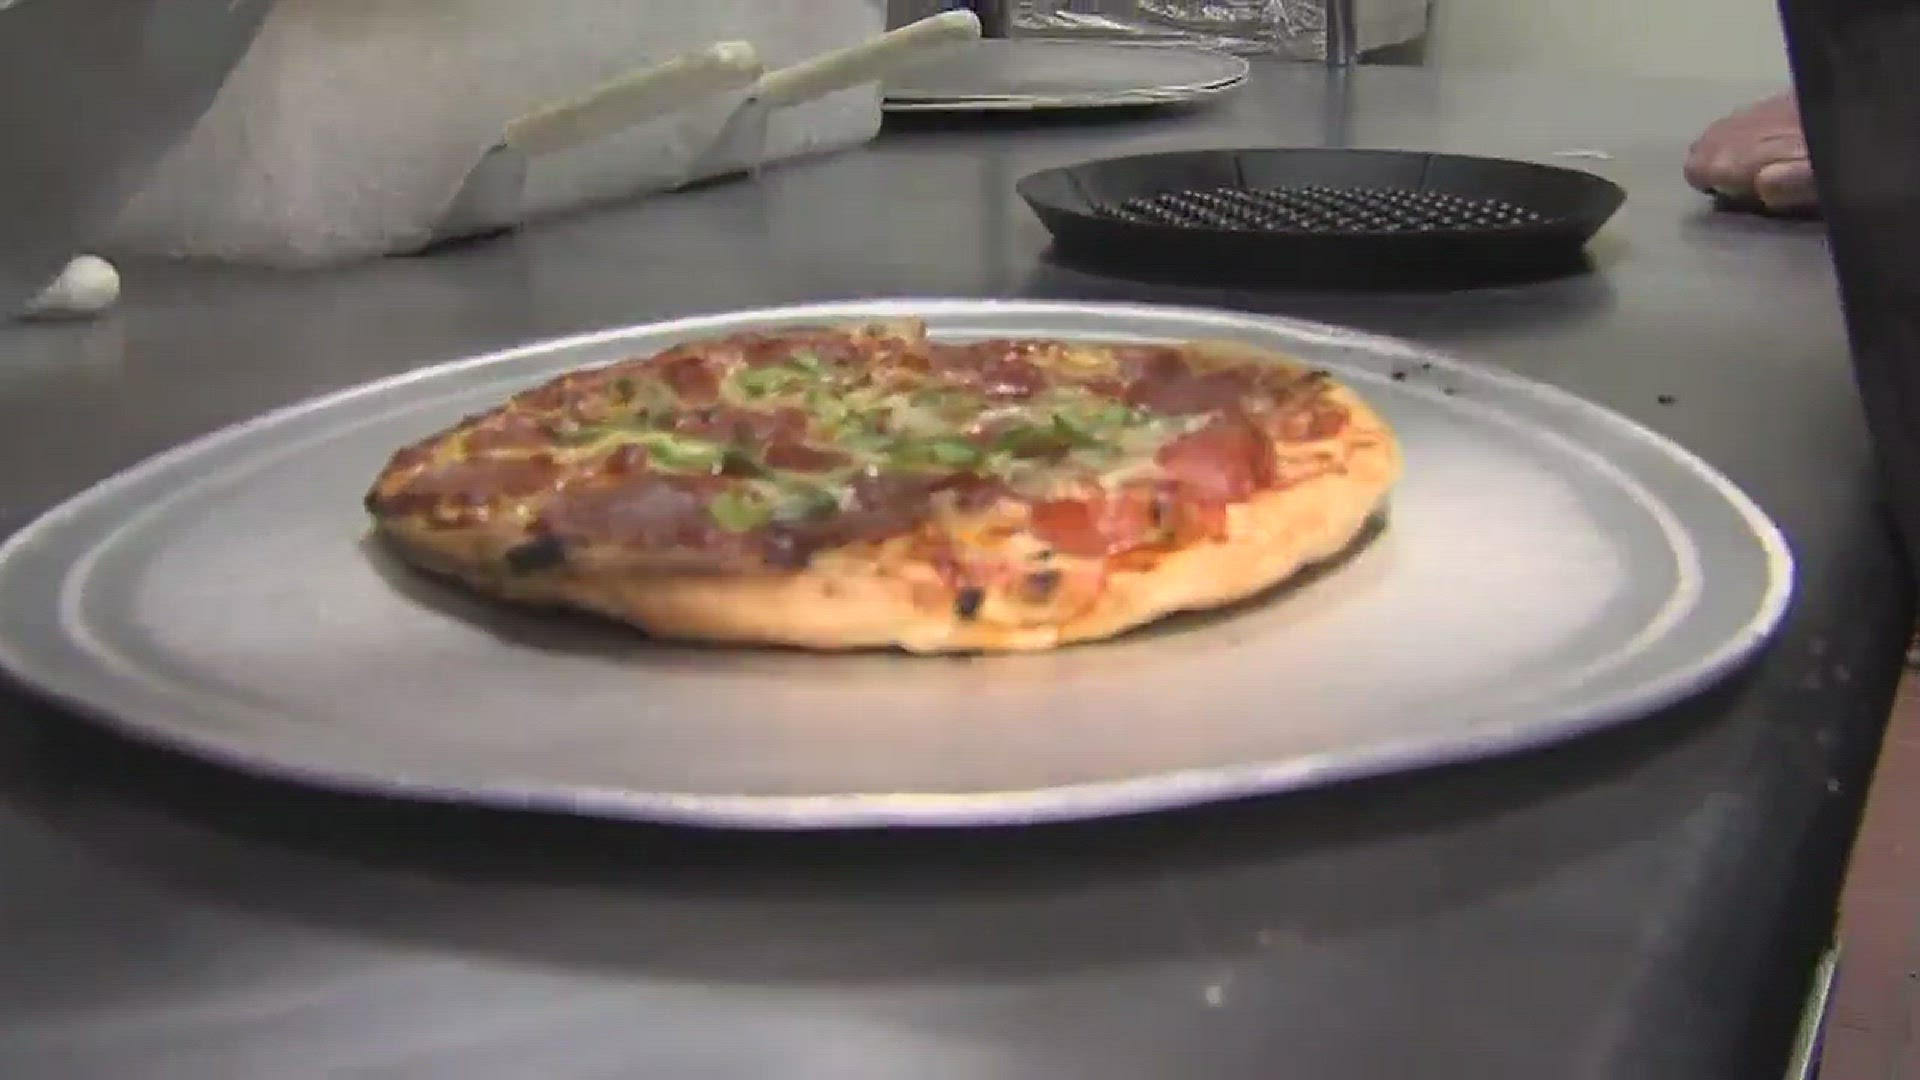 This is our first stop for PIZZA WEEK on 12 News Daybreak.